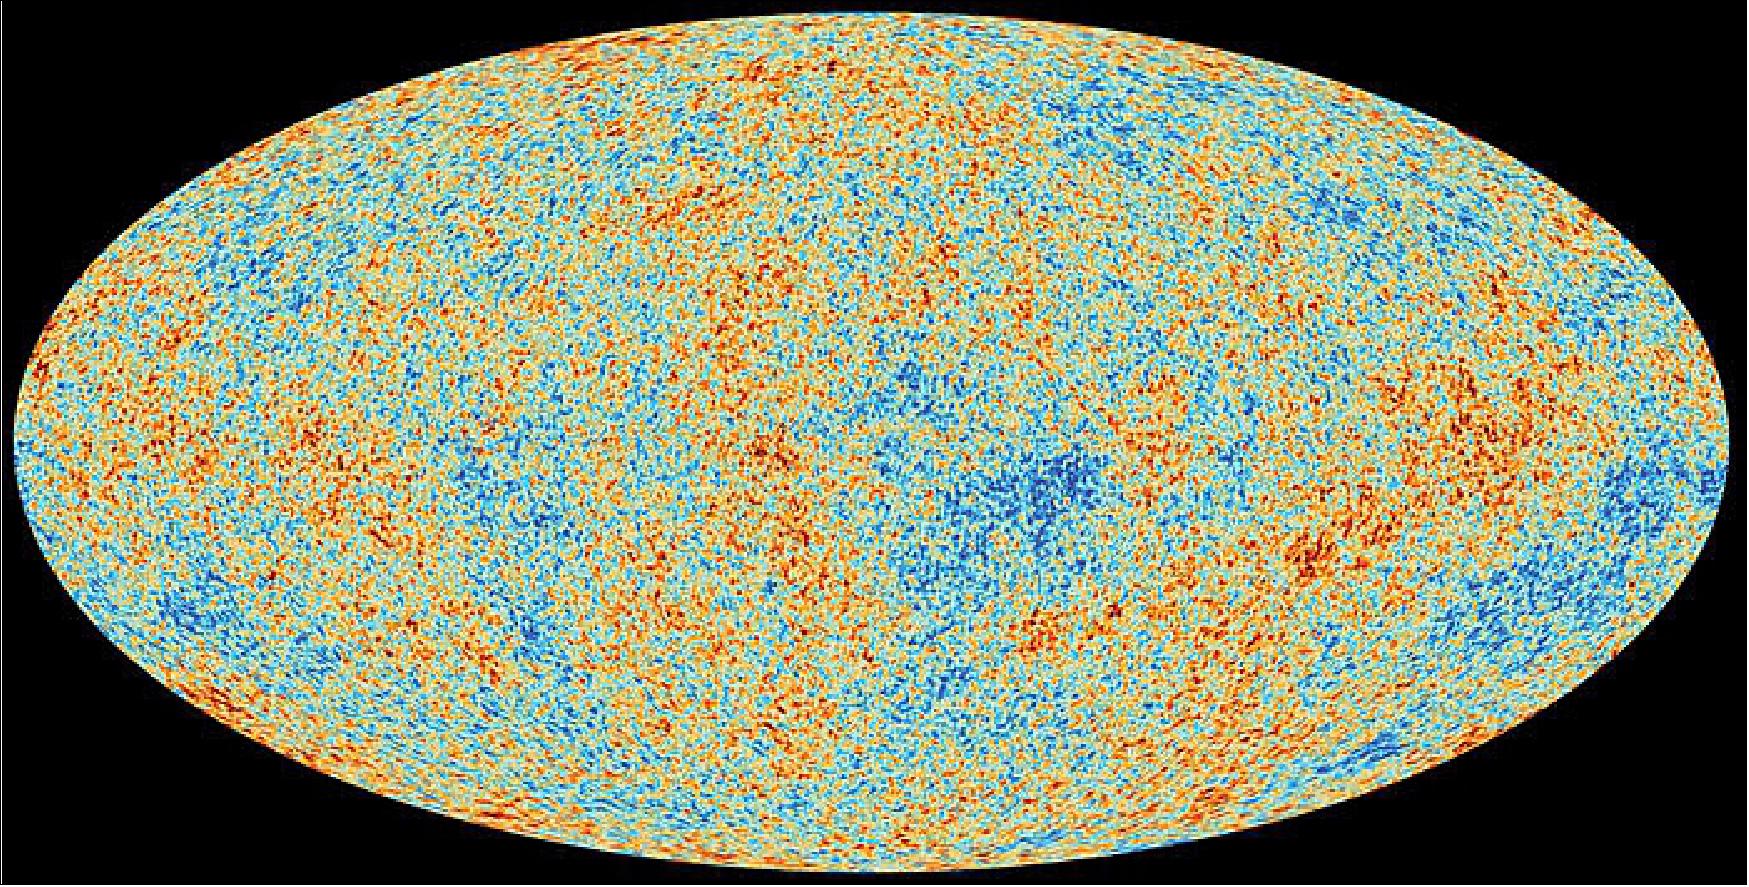 Figure 50: Planck’s view of the cosmic microwave background. The anisotropies of the cosmic microwave background, or CMB, as observed by ESA’s Planck mission. The CMB is a snapshot of the oldest light in our cosmos, imprinted on the sky when the Universe was just 380 000 years old. It shows tiny temperature fluctuations that correspond to regions of slightly different densities, representing the seeds of all future structure: the stars and galaxies of today. This image is based on data from the Planck Legacy release, the mission’s final data release, published in July 2018 (image credit: ESA/Planck Collaboration)